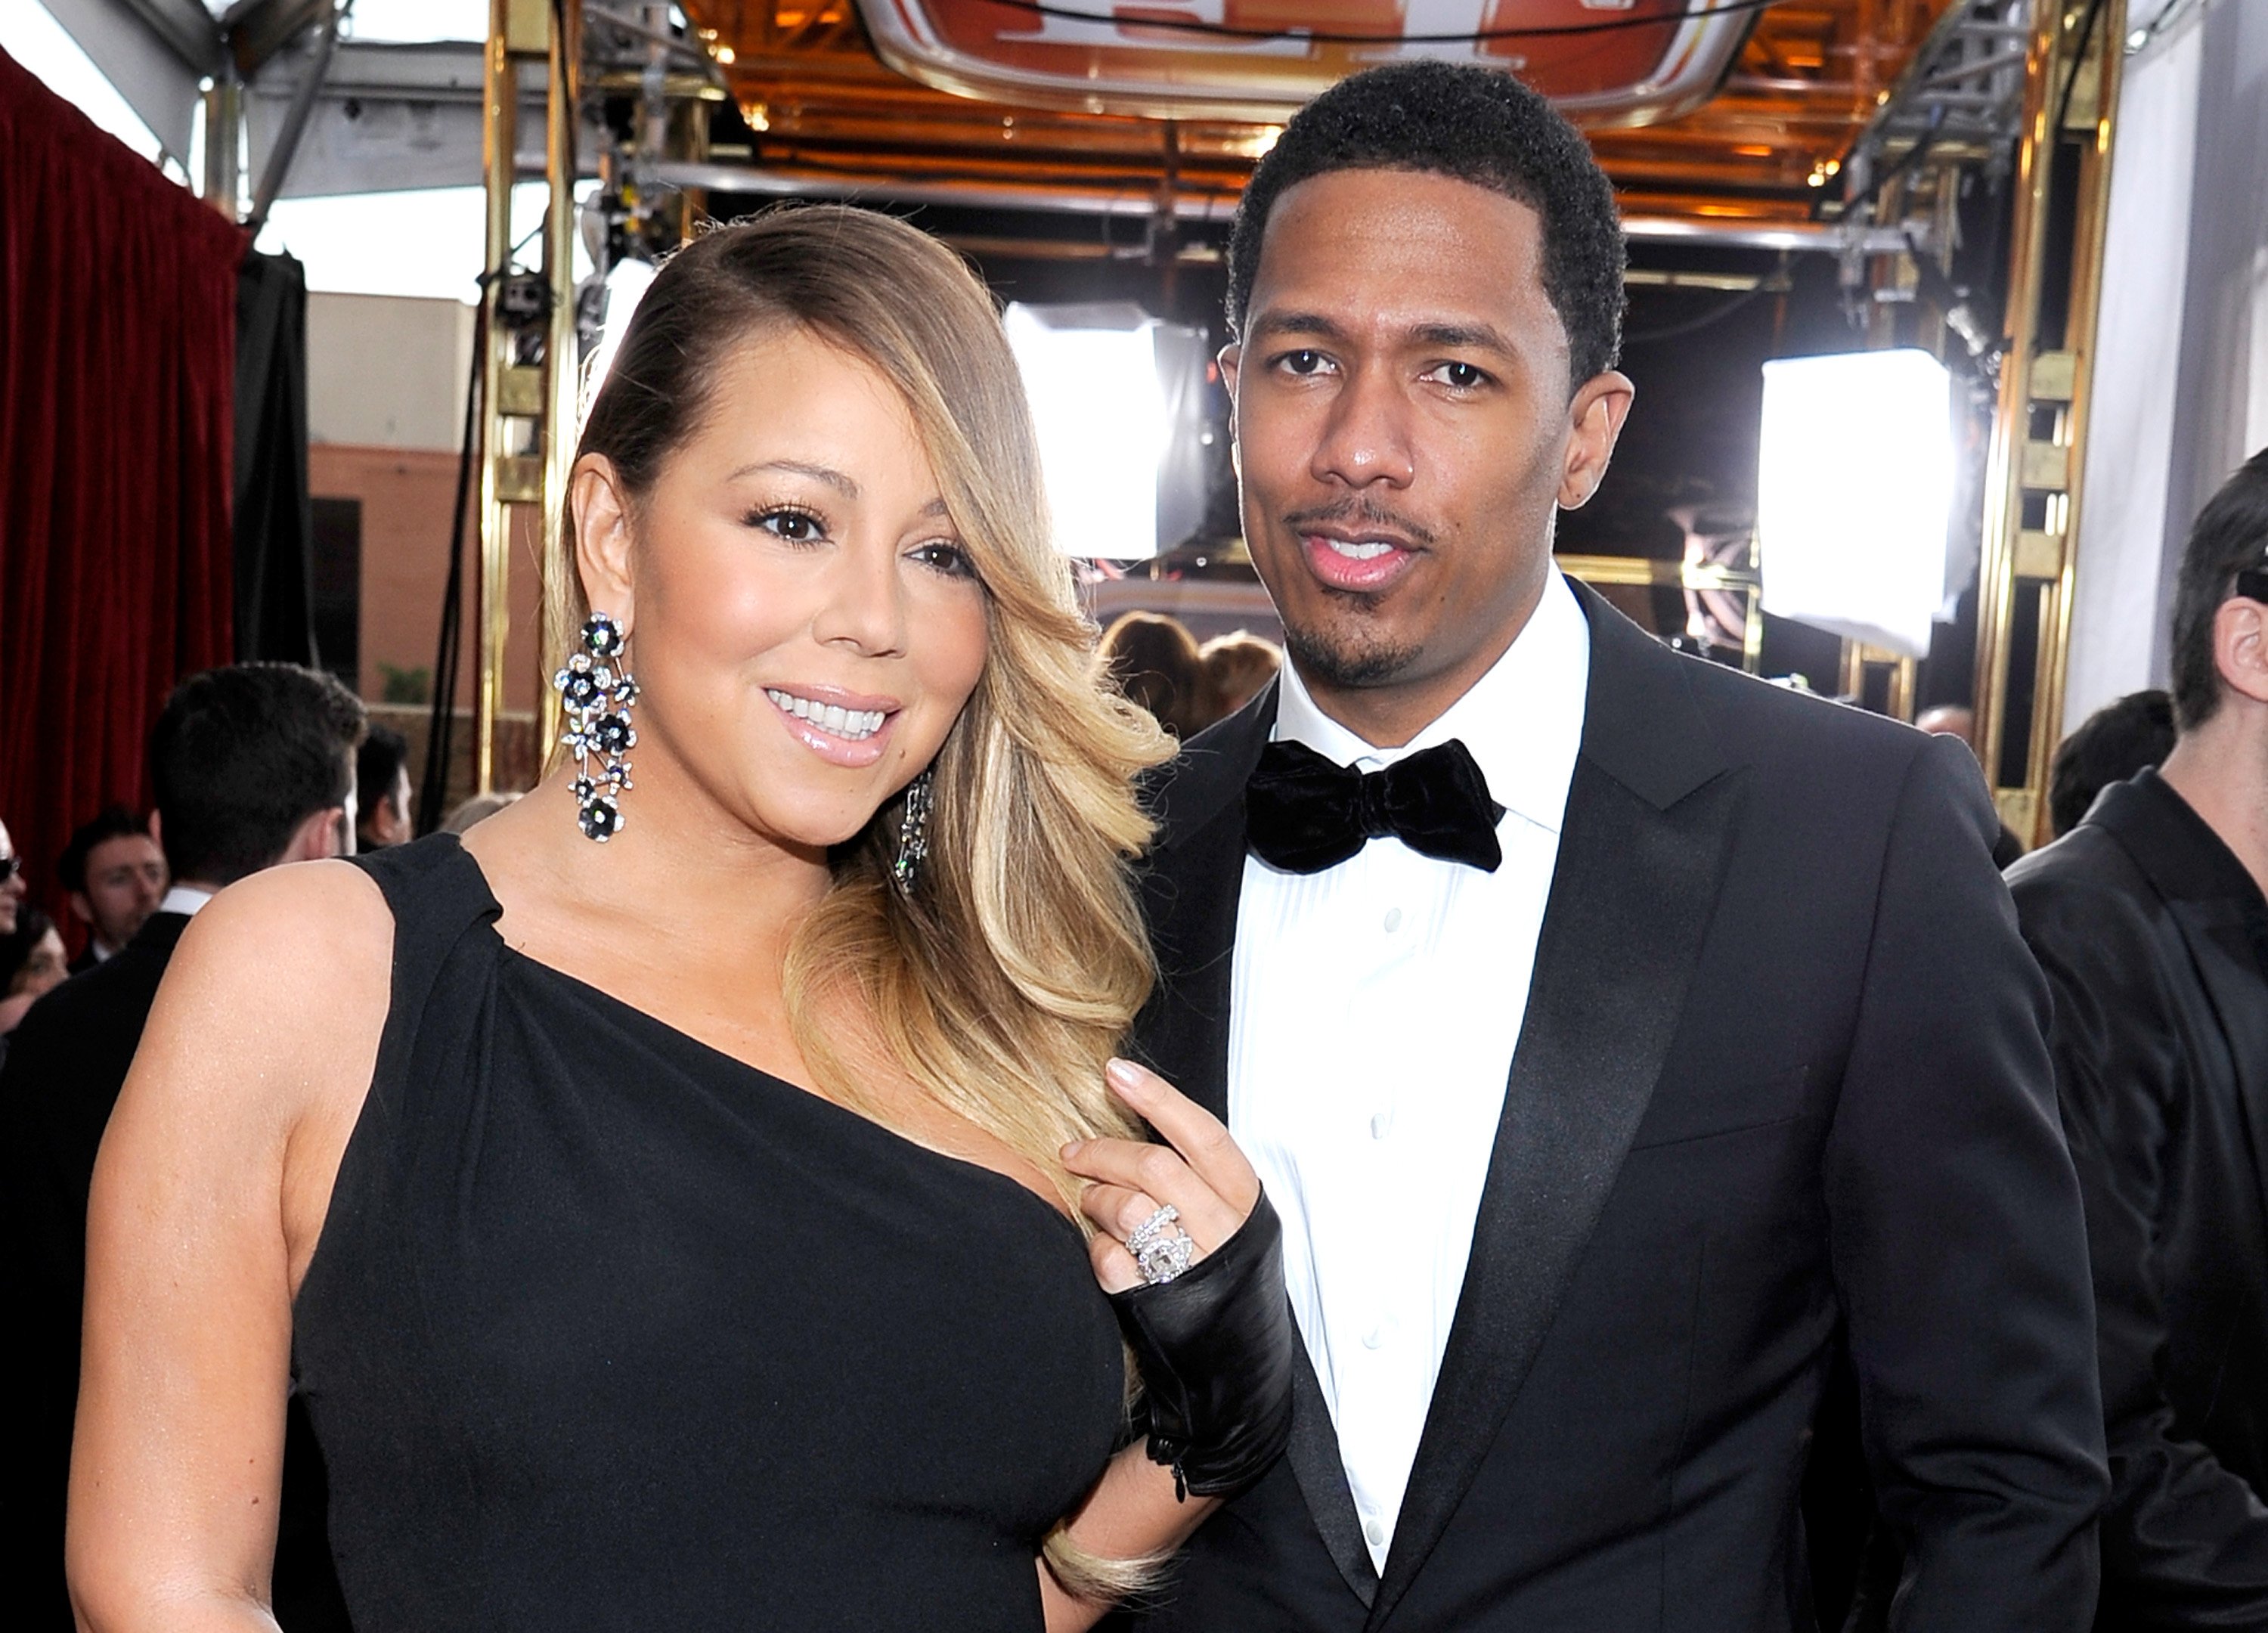 Ex-spouses Mariah Carey and Nick Cannon attending an awards event in January 2014. | Photo: Getty Images